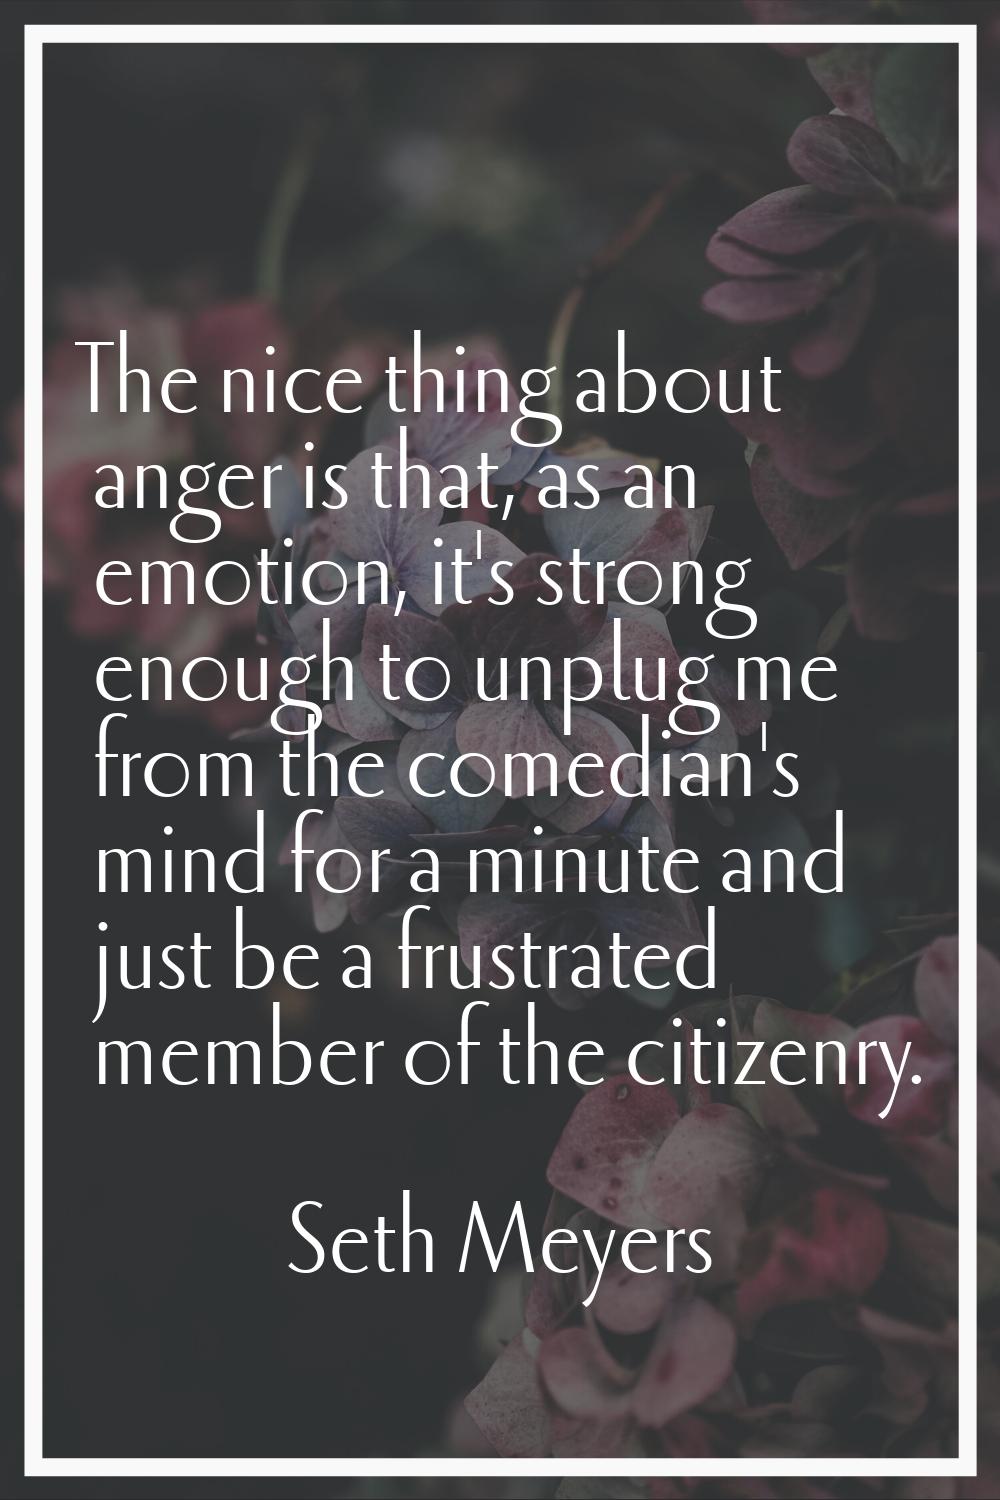 The nice thing about anger is that, as an emotion, it's strong enough to unplug me from the comedia